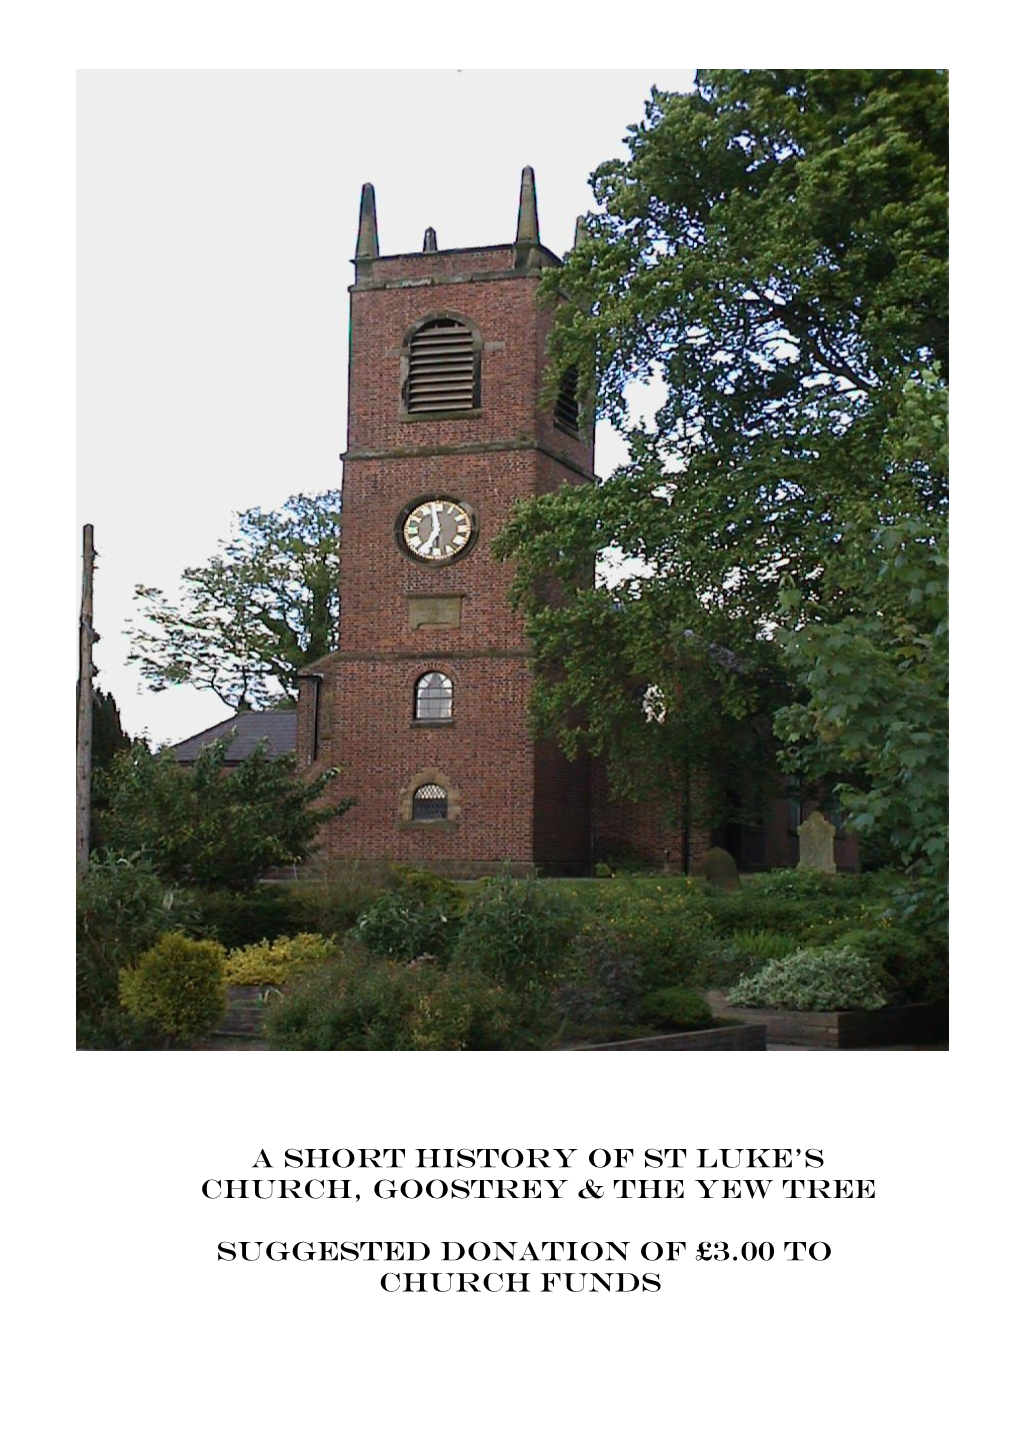 A SHORT HISTORY of ST LUKE's Church, GOOSTREY & the Yew